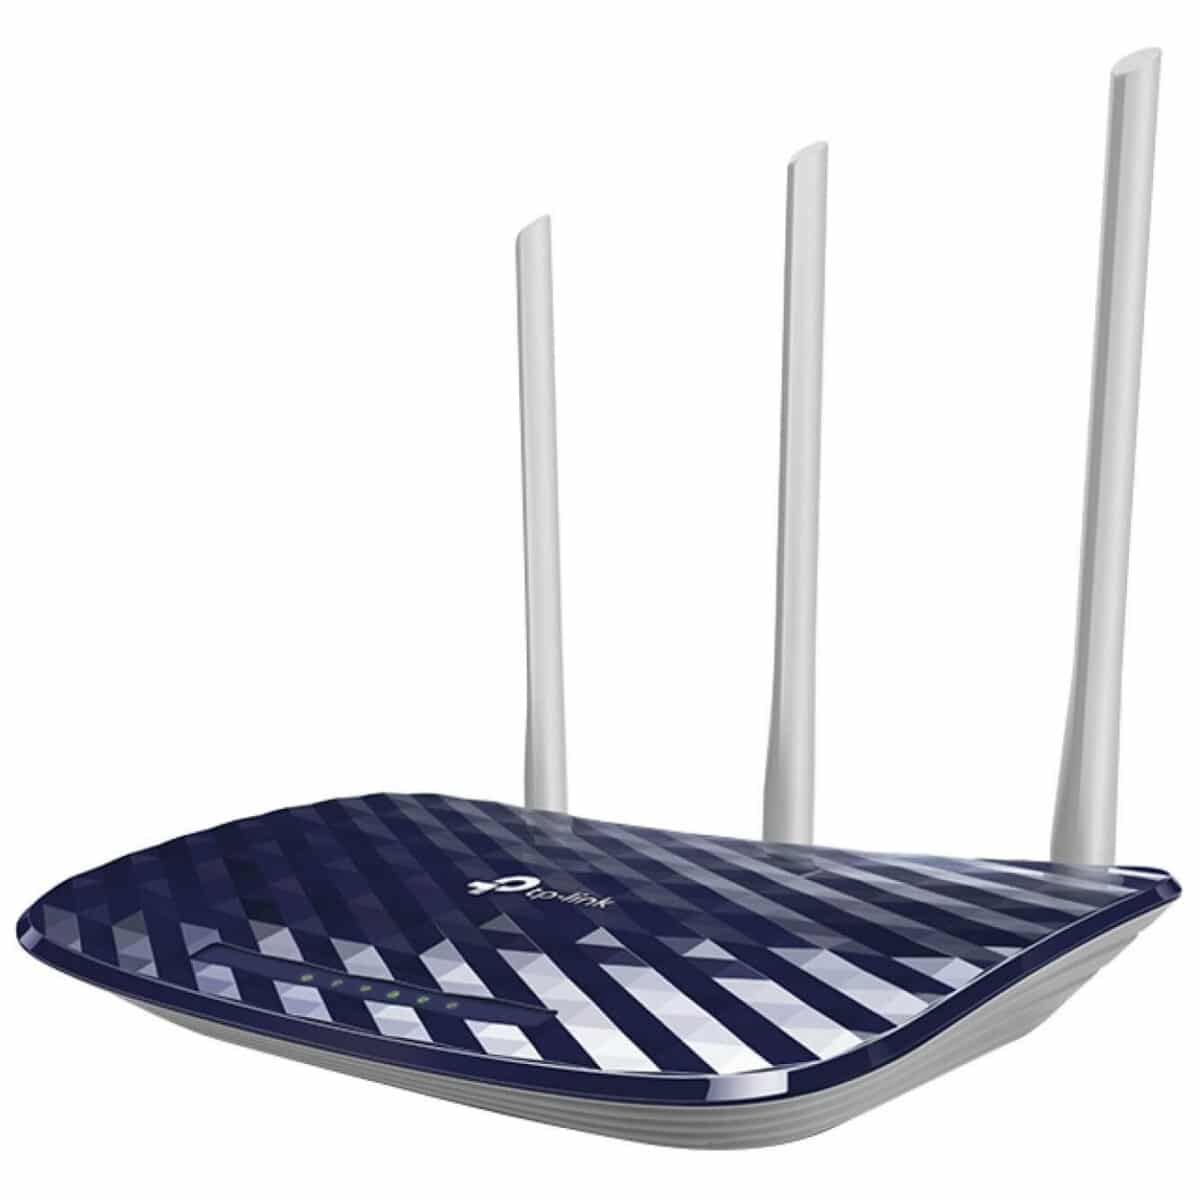 TP-Link ARCHER C20 733Mbps Dual-Band Wi-Fi Router